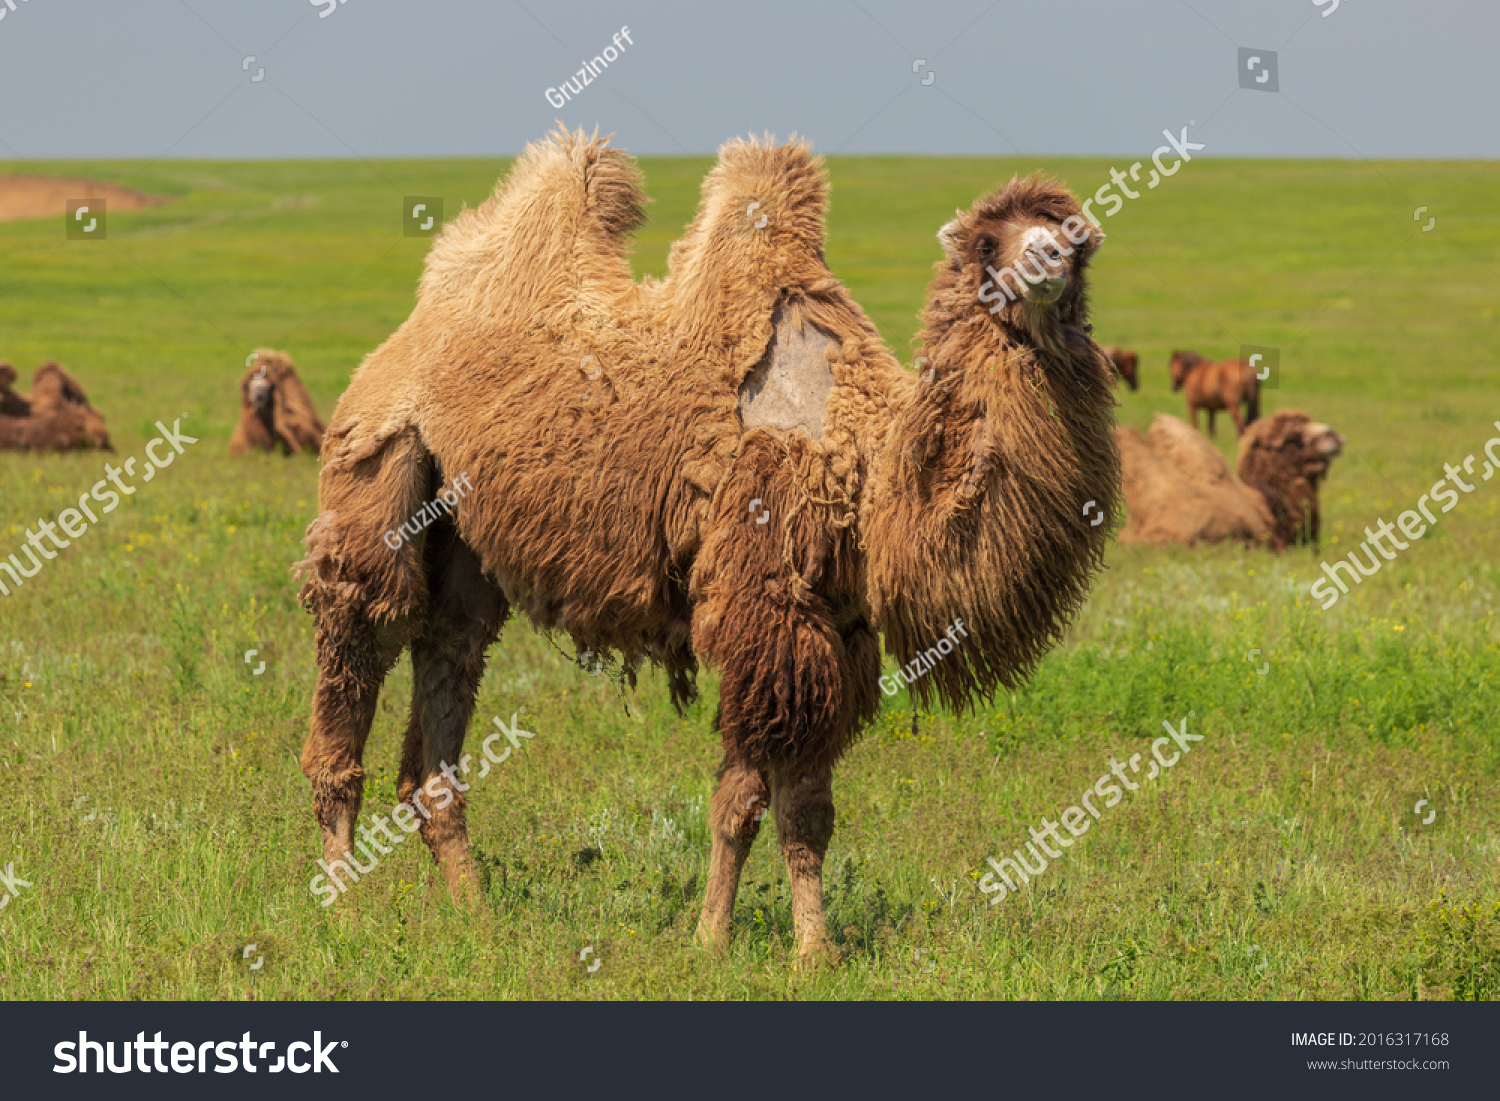 The two-humped camel or bactrian camel in the green Kalmyk steppe near lake Manych-Gudilo. #2016317168